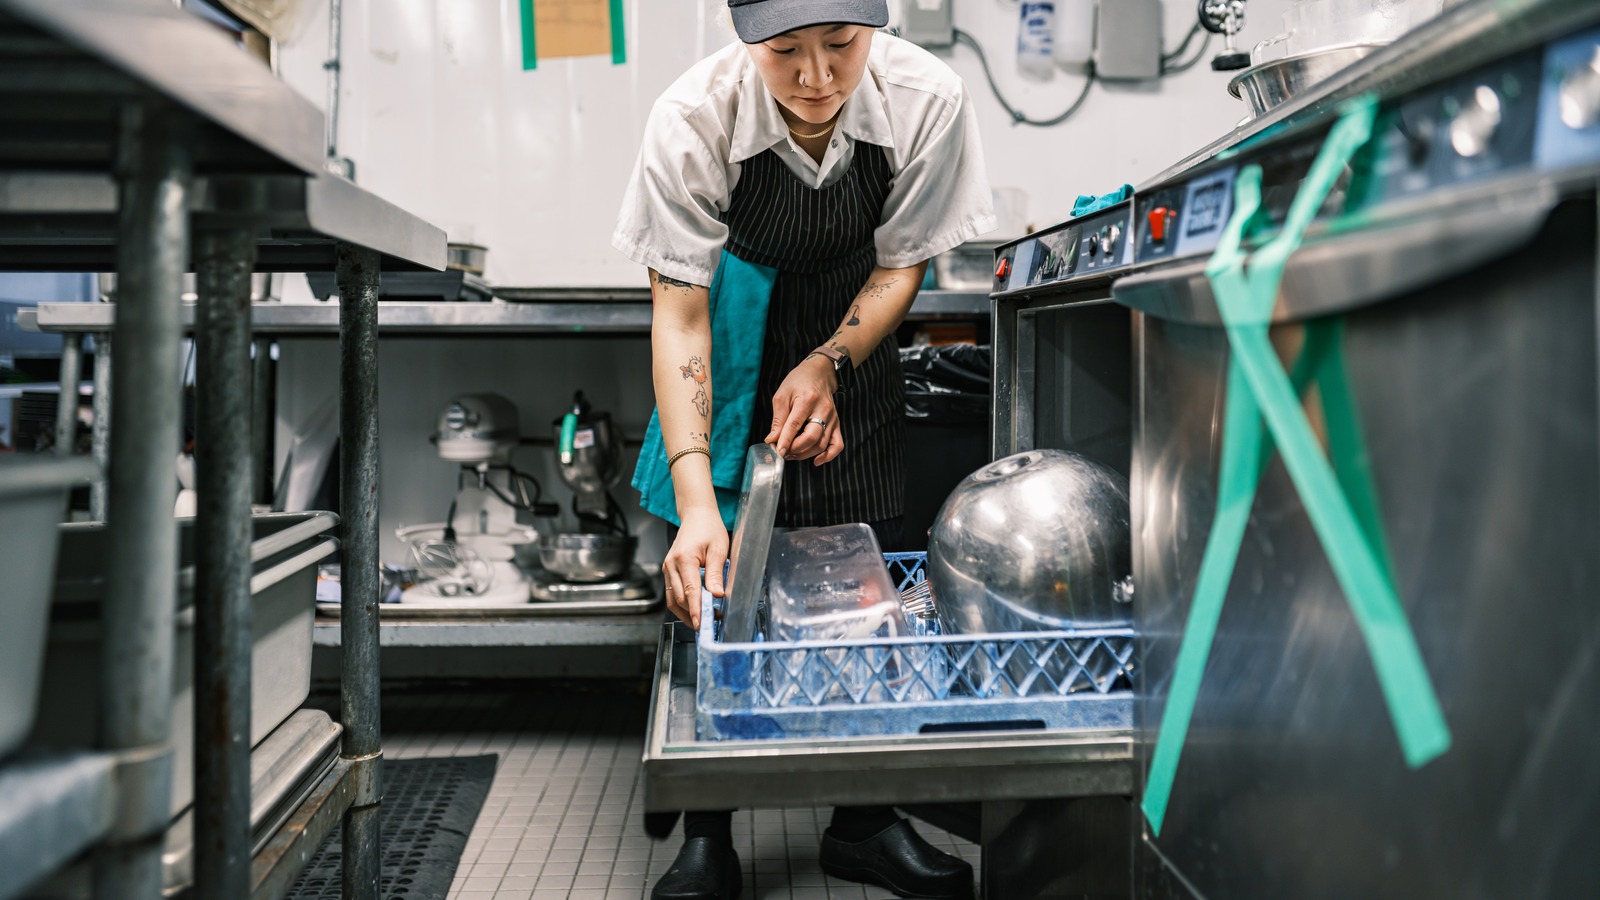 What Working As A Restaurant Dishwasher Is Really Like – Mashed